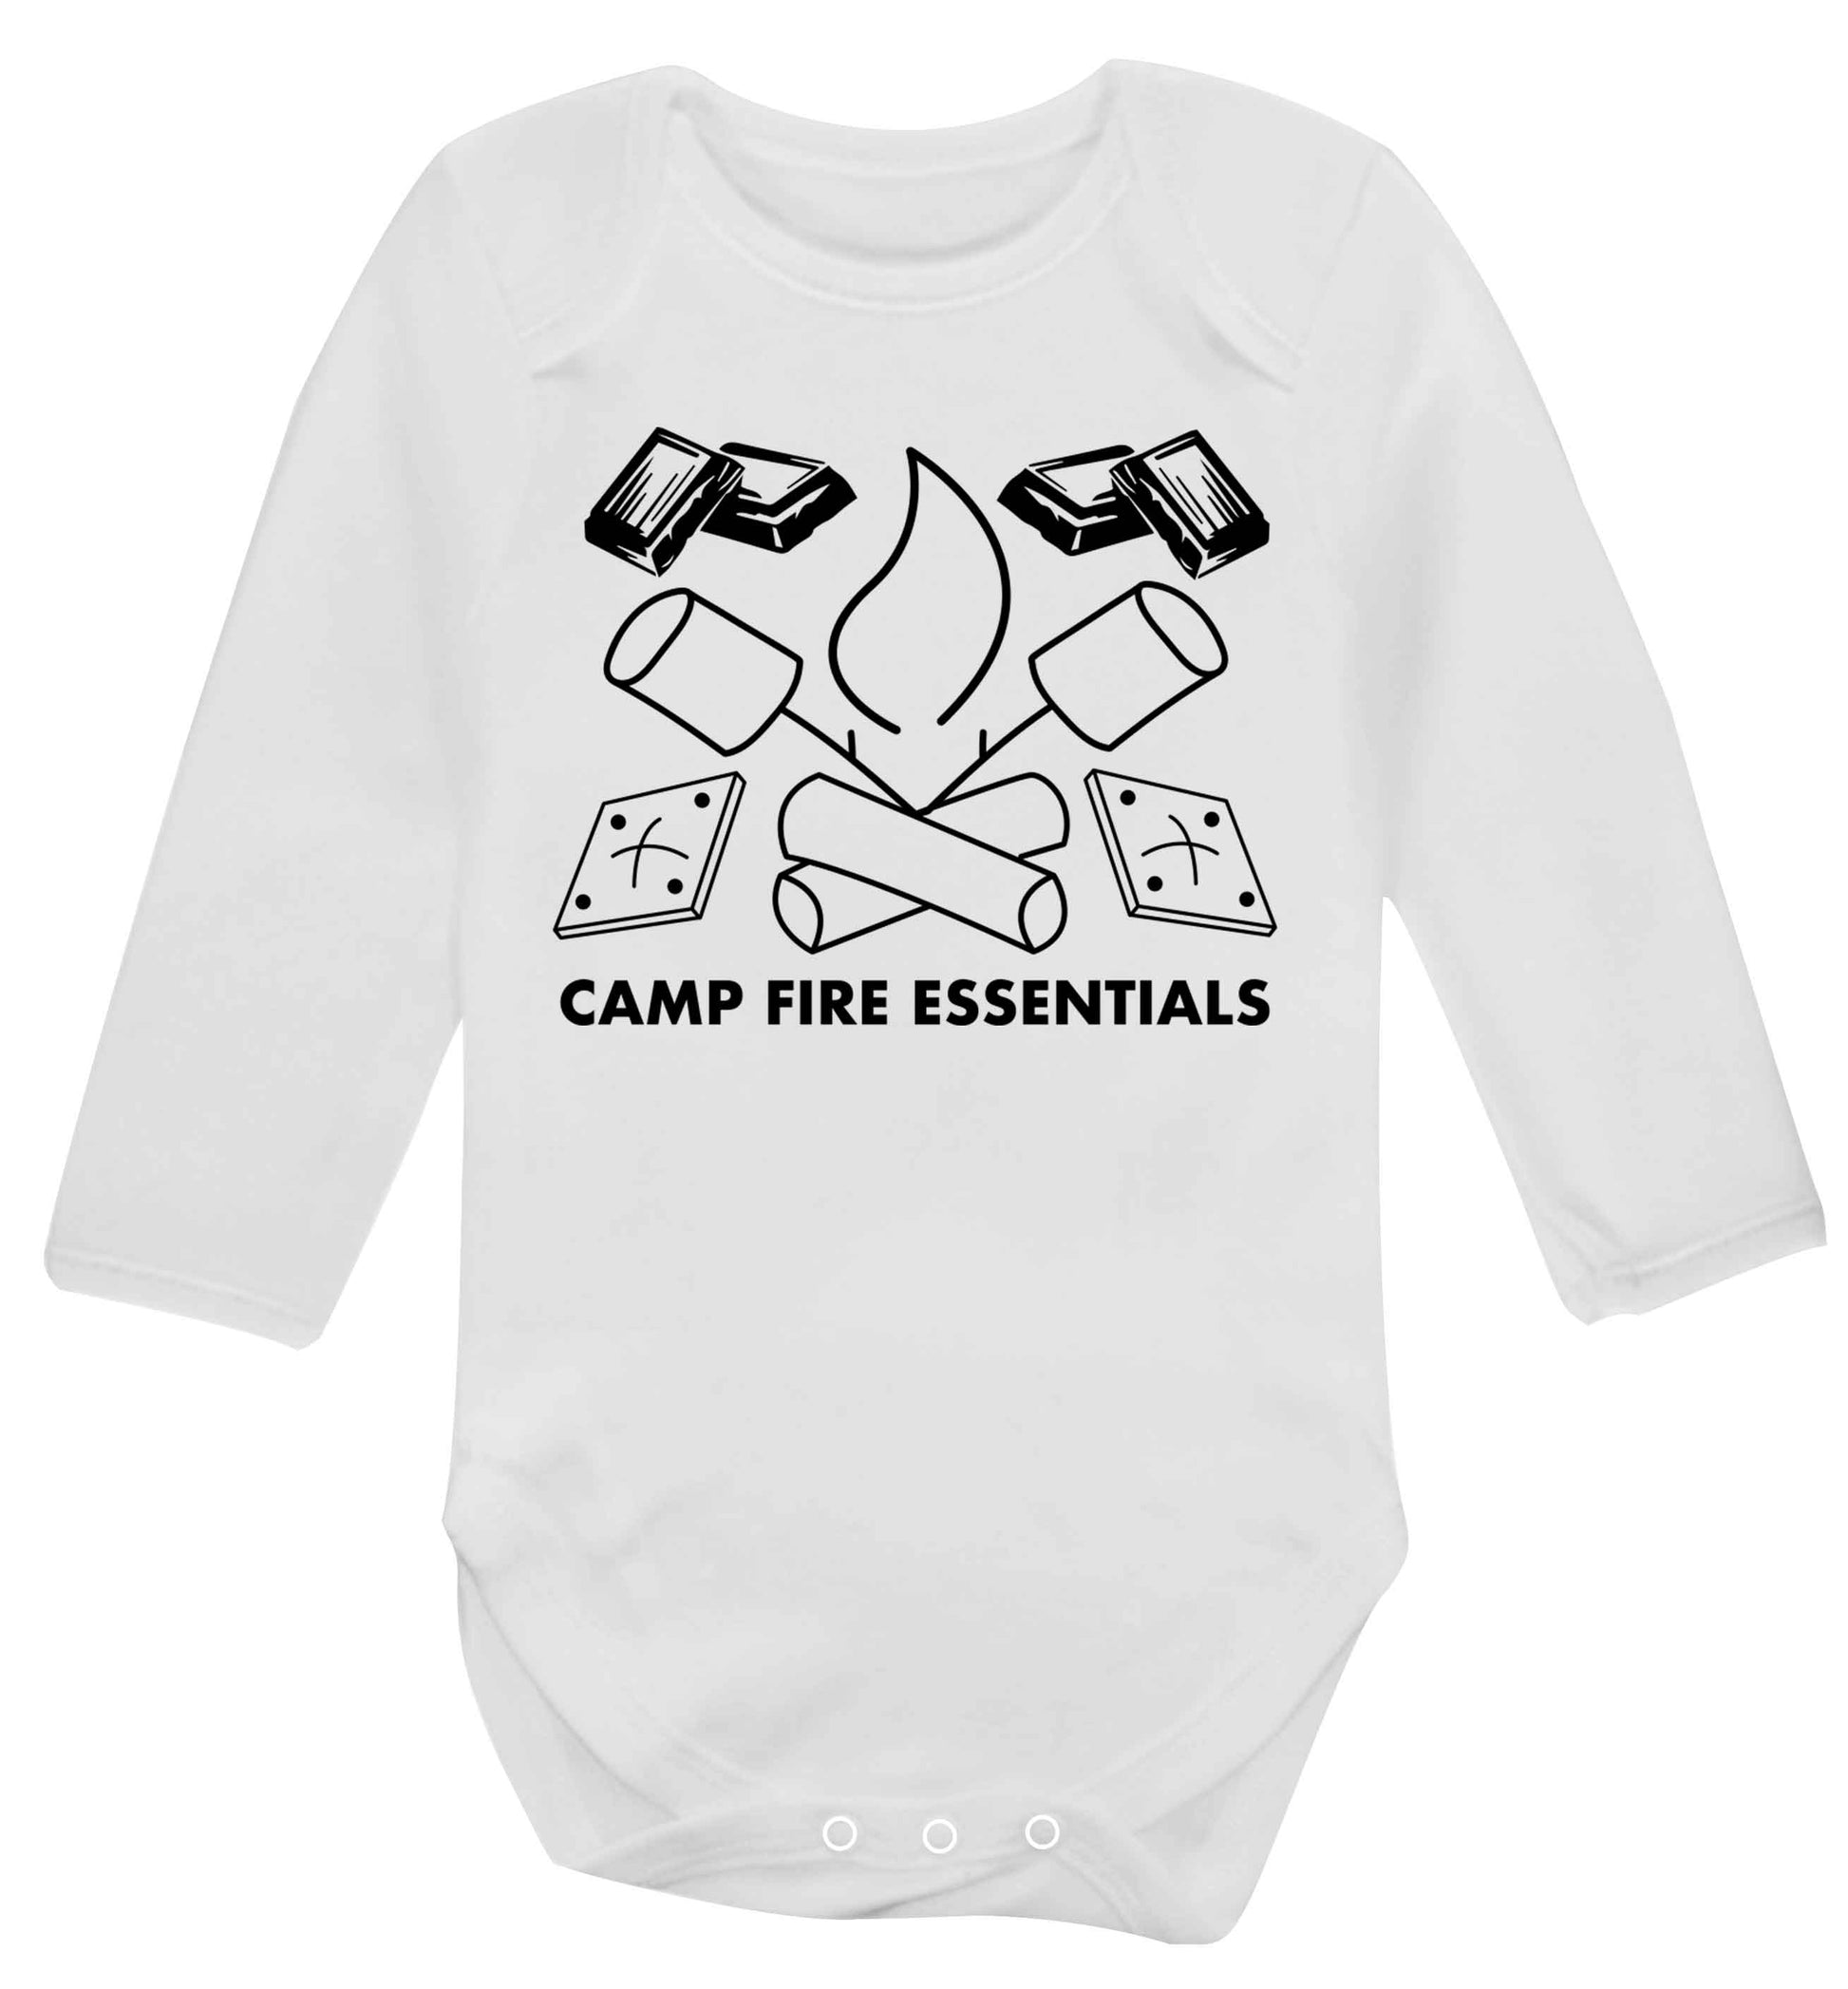 Campfire essentials Baby Vest long sleeved white 6-12 months